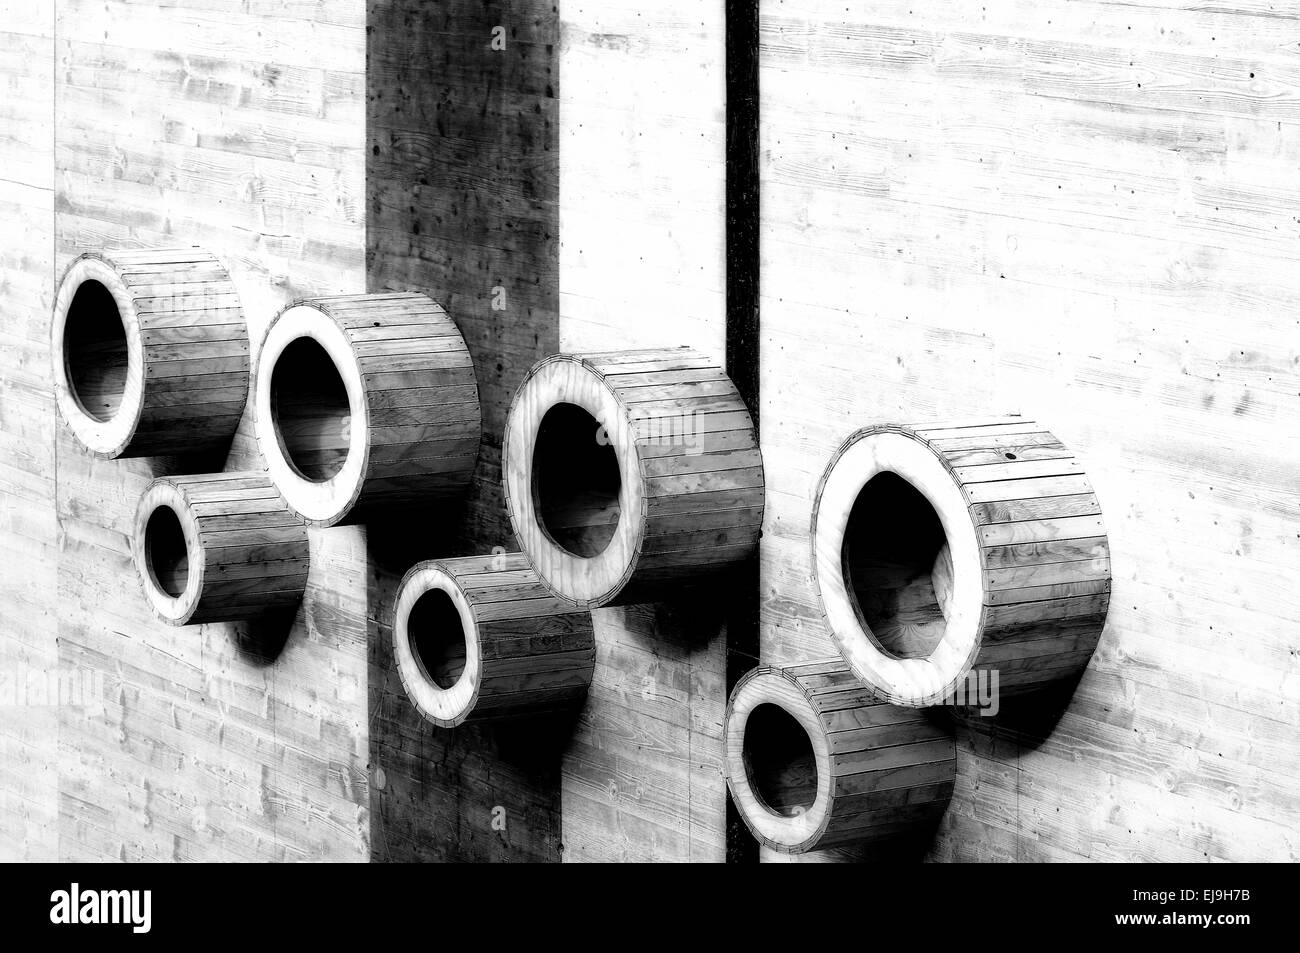 Timber construction black and white Stock Photo